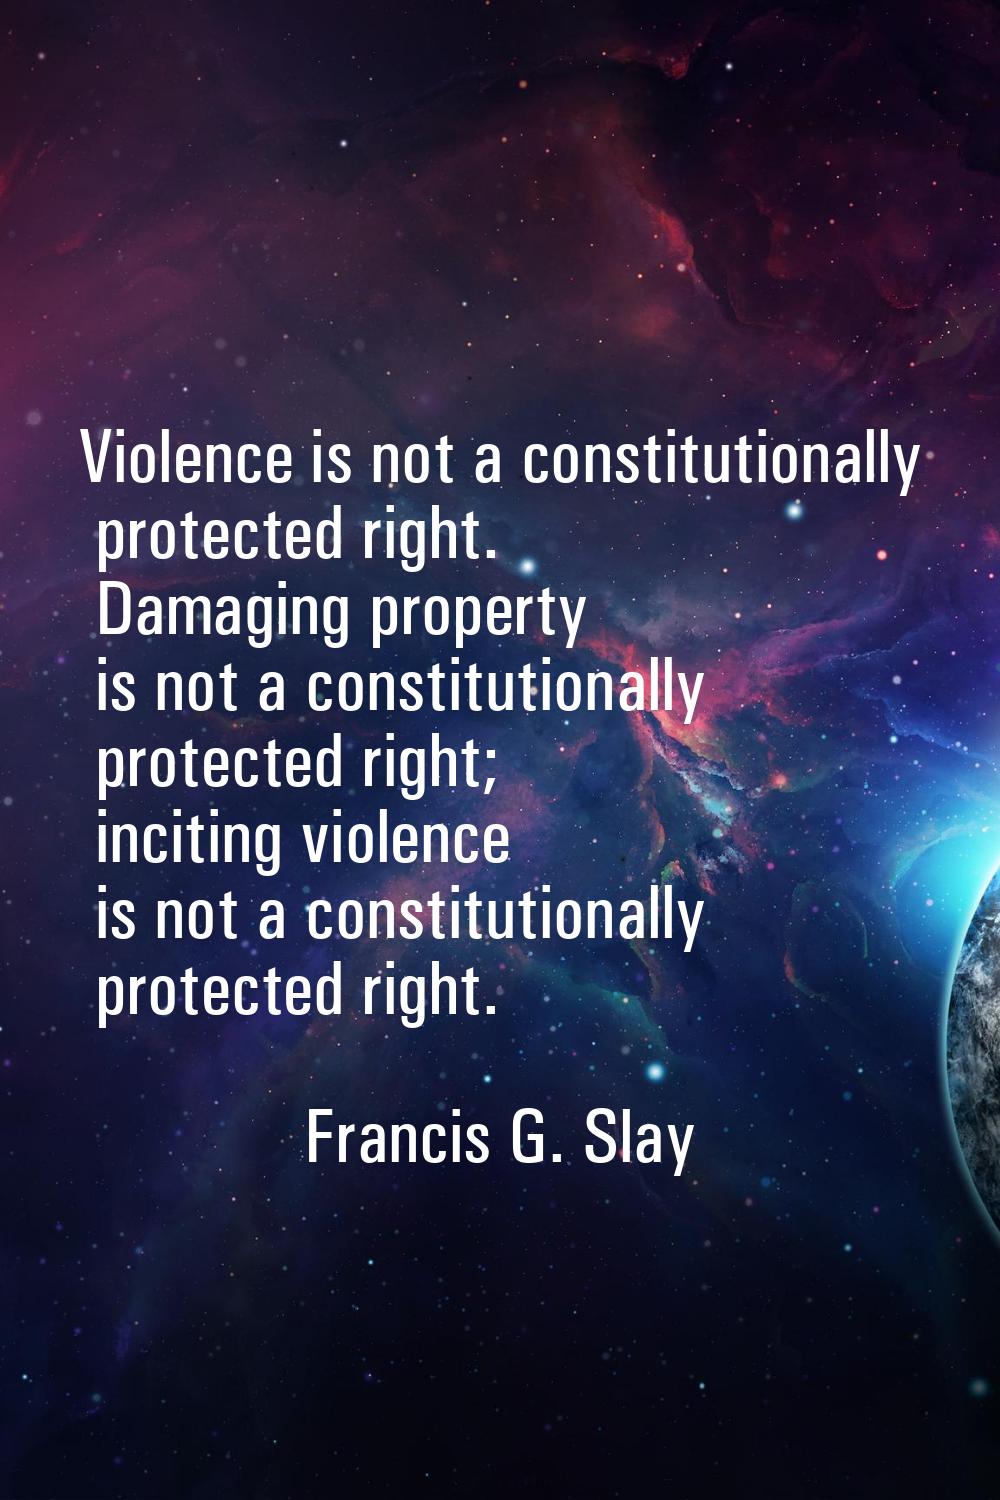 Violence is not a constitutionally protected right. Damaging property is not a constitutionally pro